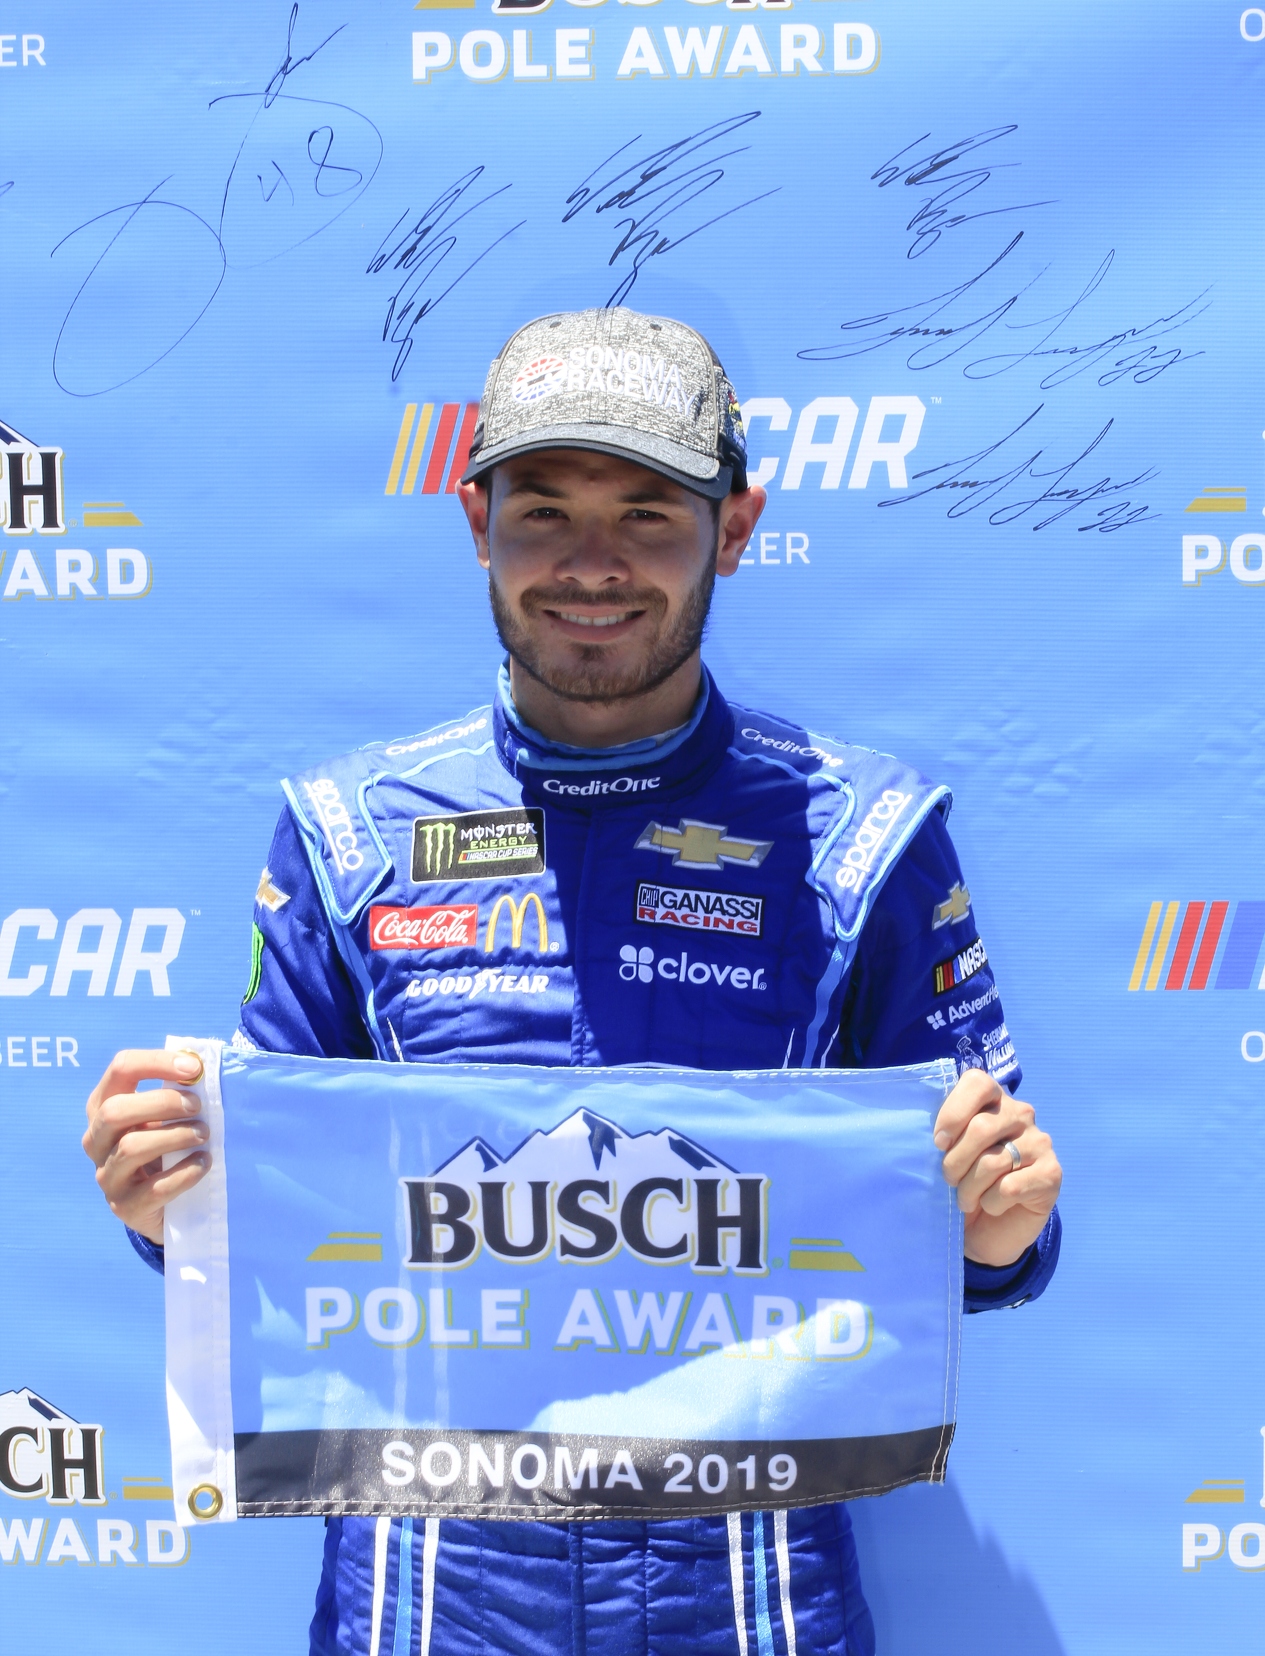 Larson claims his first Busch Pole Award for the 2019 season at his home track at Sonoma Raceway. Photo courtesy of Rachel Schuoler for Speedway Media.